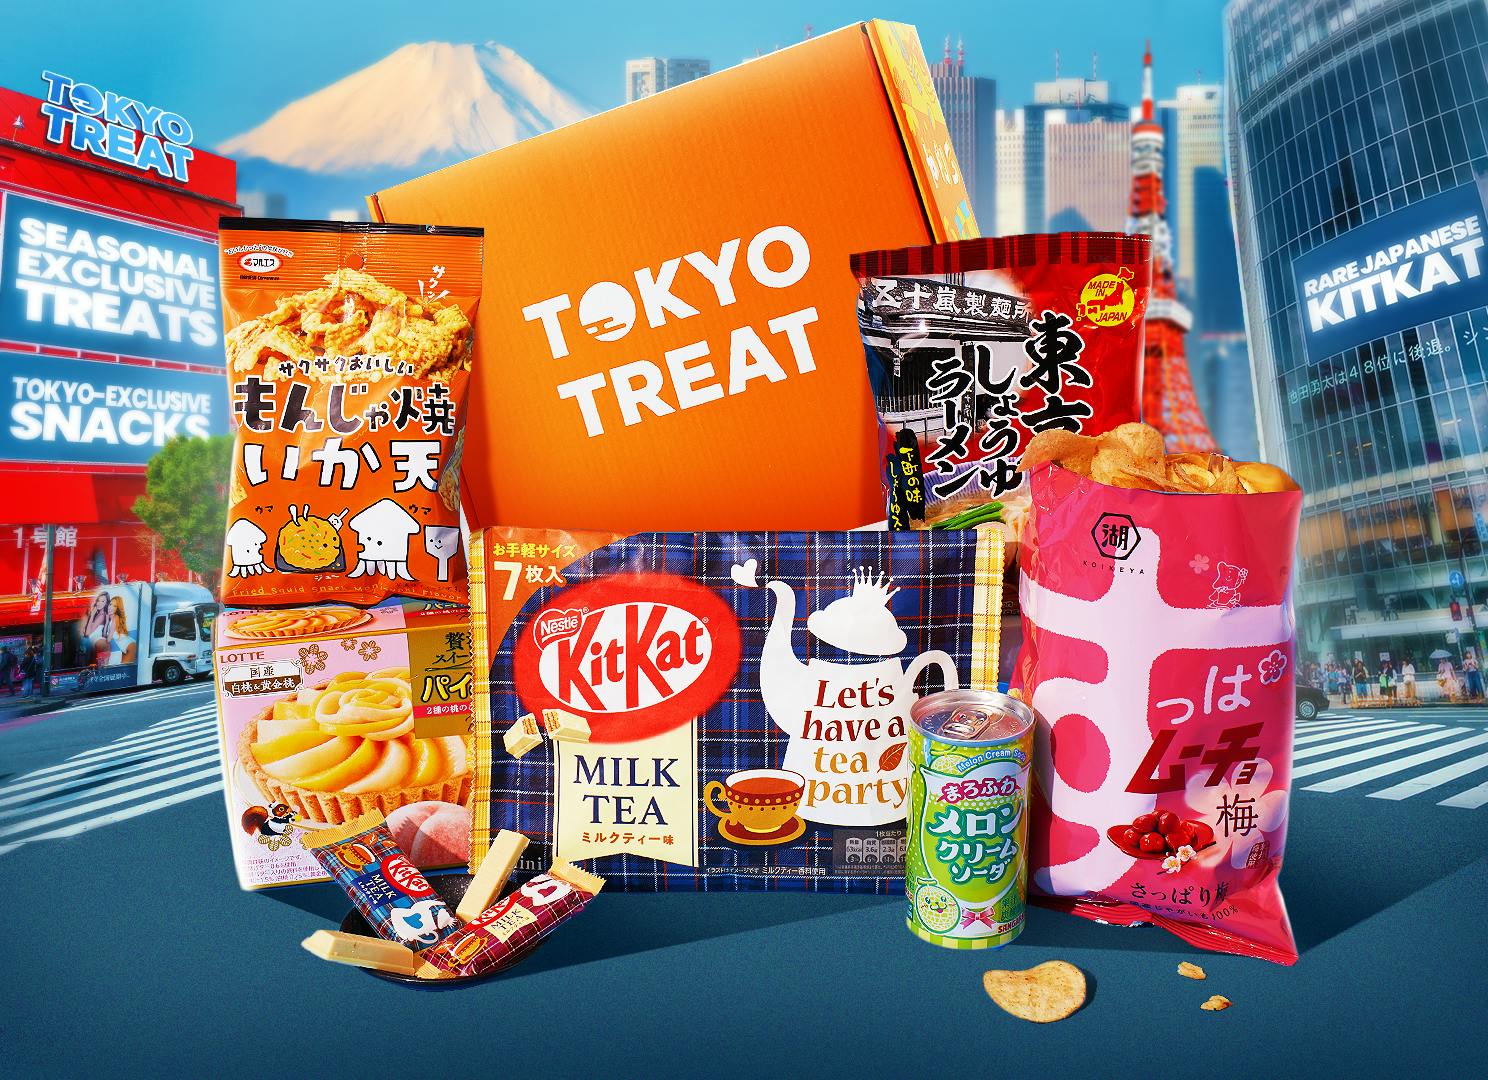 The Tokyo Snackation box items sit against a backdrop of a Tokyo cityscape.